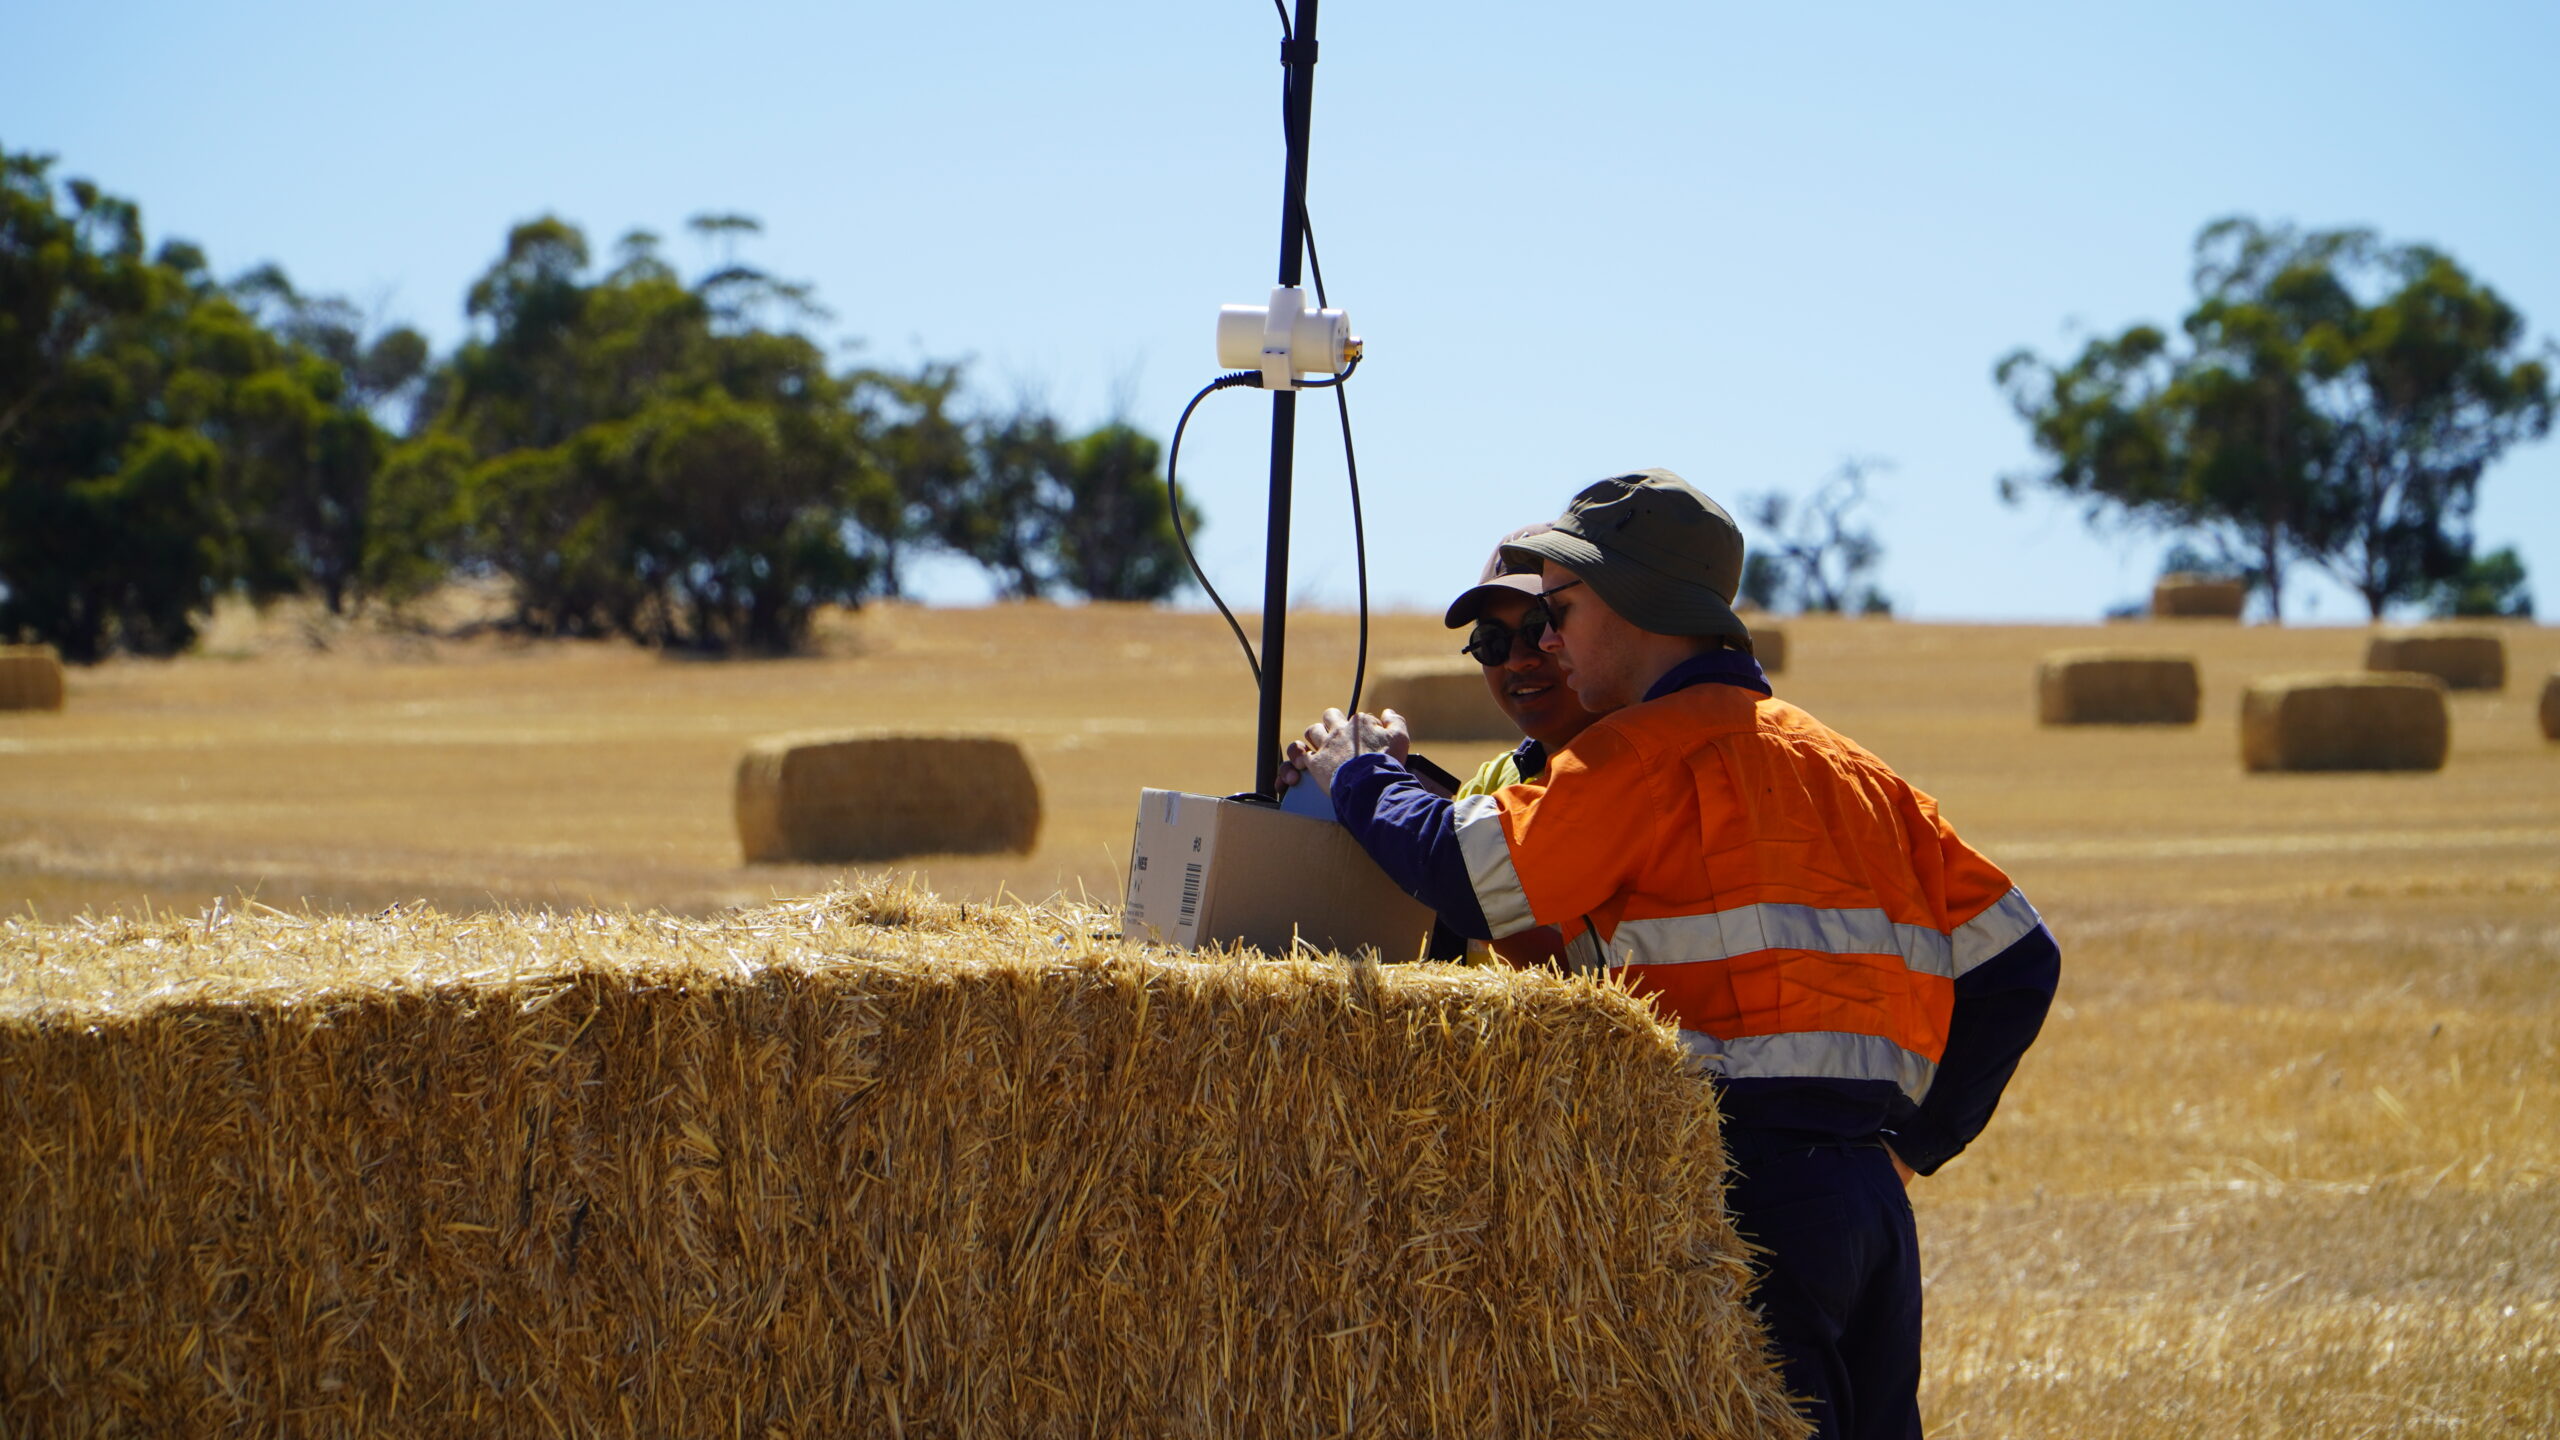 Two people looking at drone equipment on top of a hay bale.